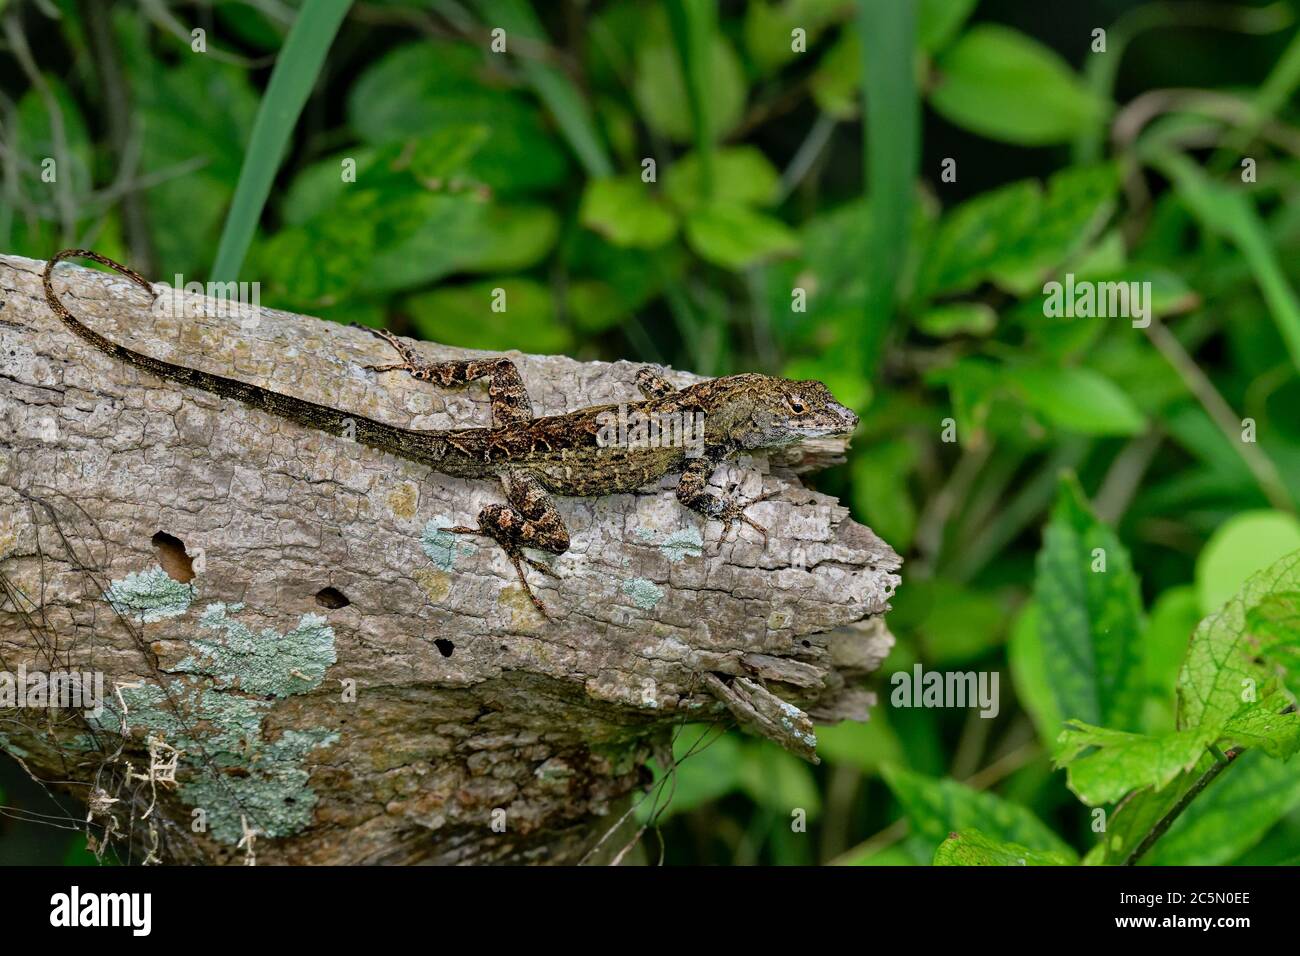 'Mr. Brown' is guarding his territory. Stock Photo